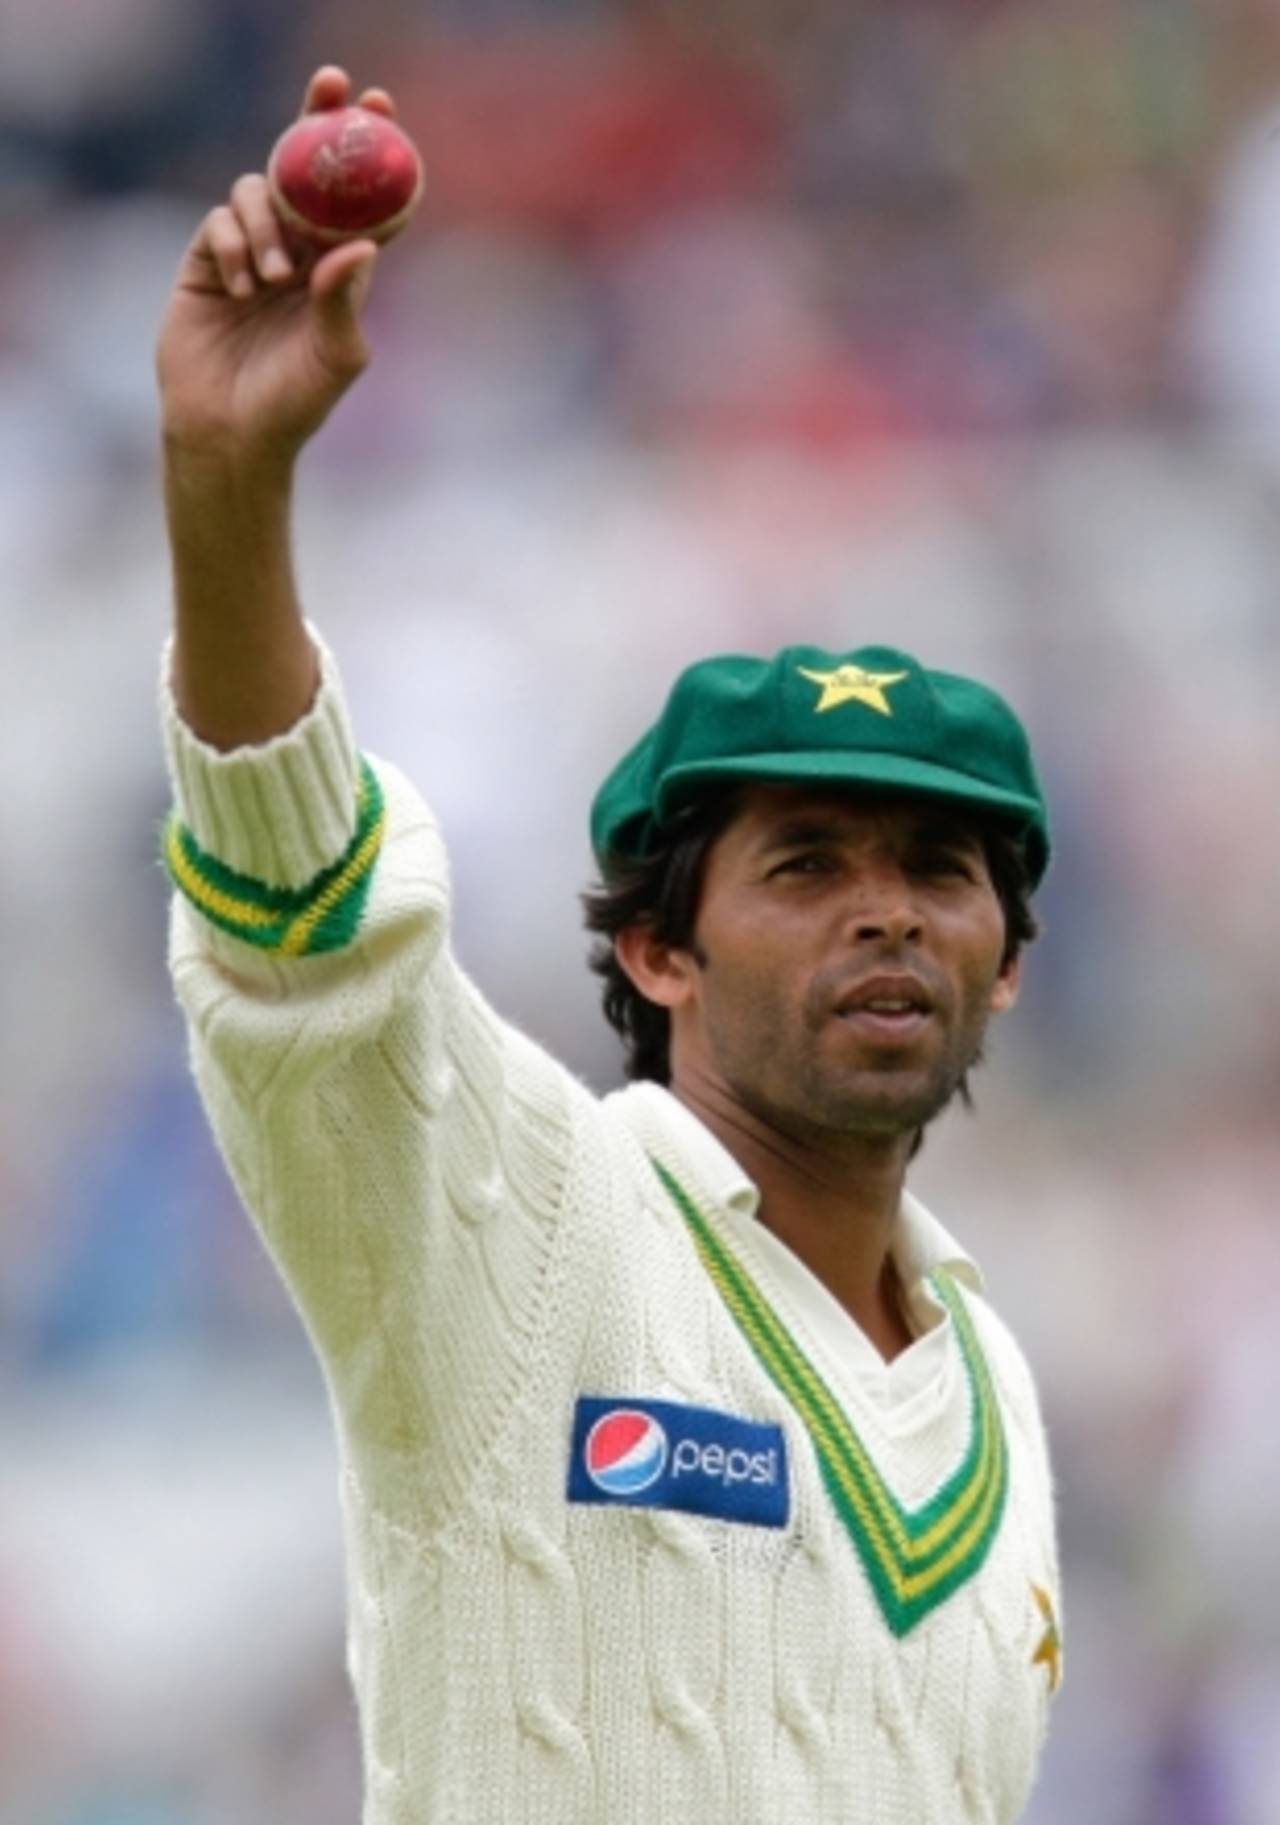 Mohammad Asif celebrates applause after taking his seventh five-wicket haul in Tests, England v Pakistan, 1st Test, Trent Bridge, 2nd day, July 30, 2010